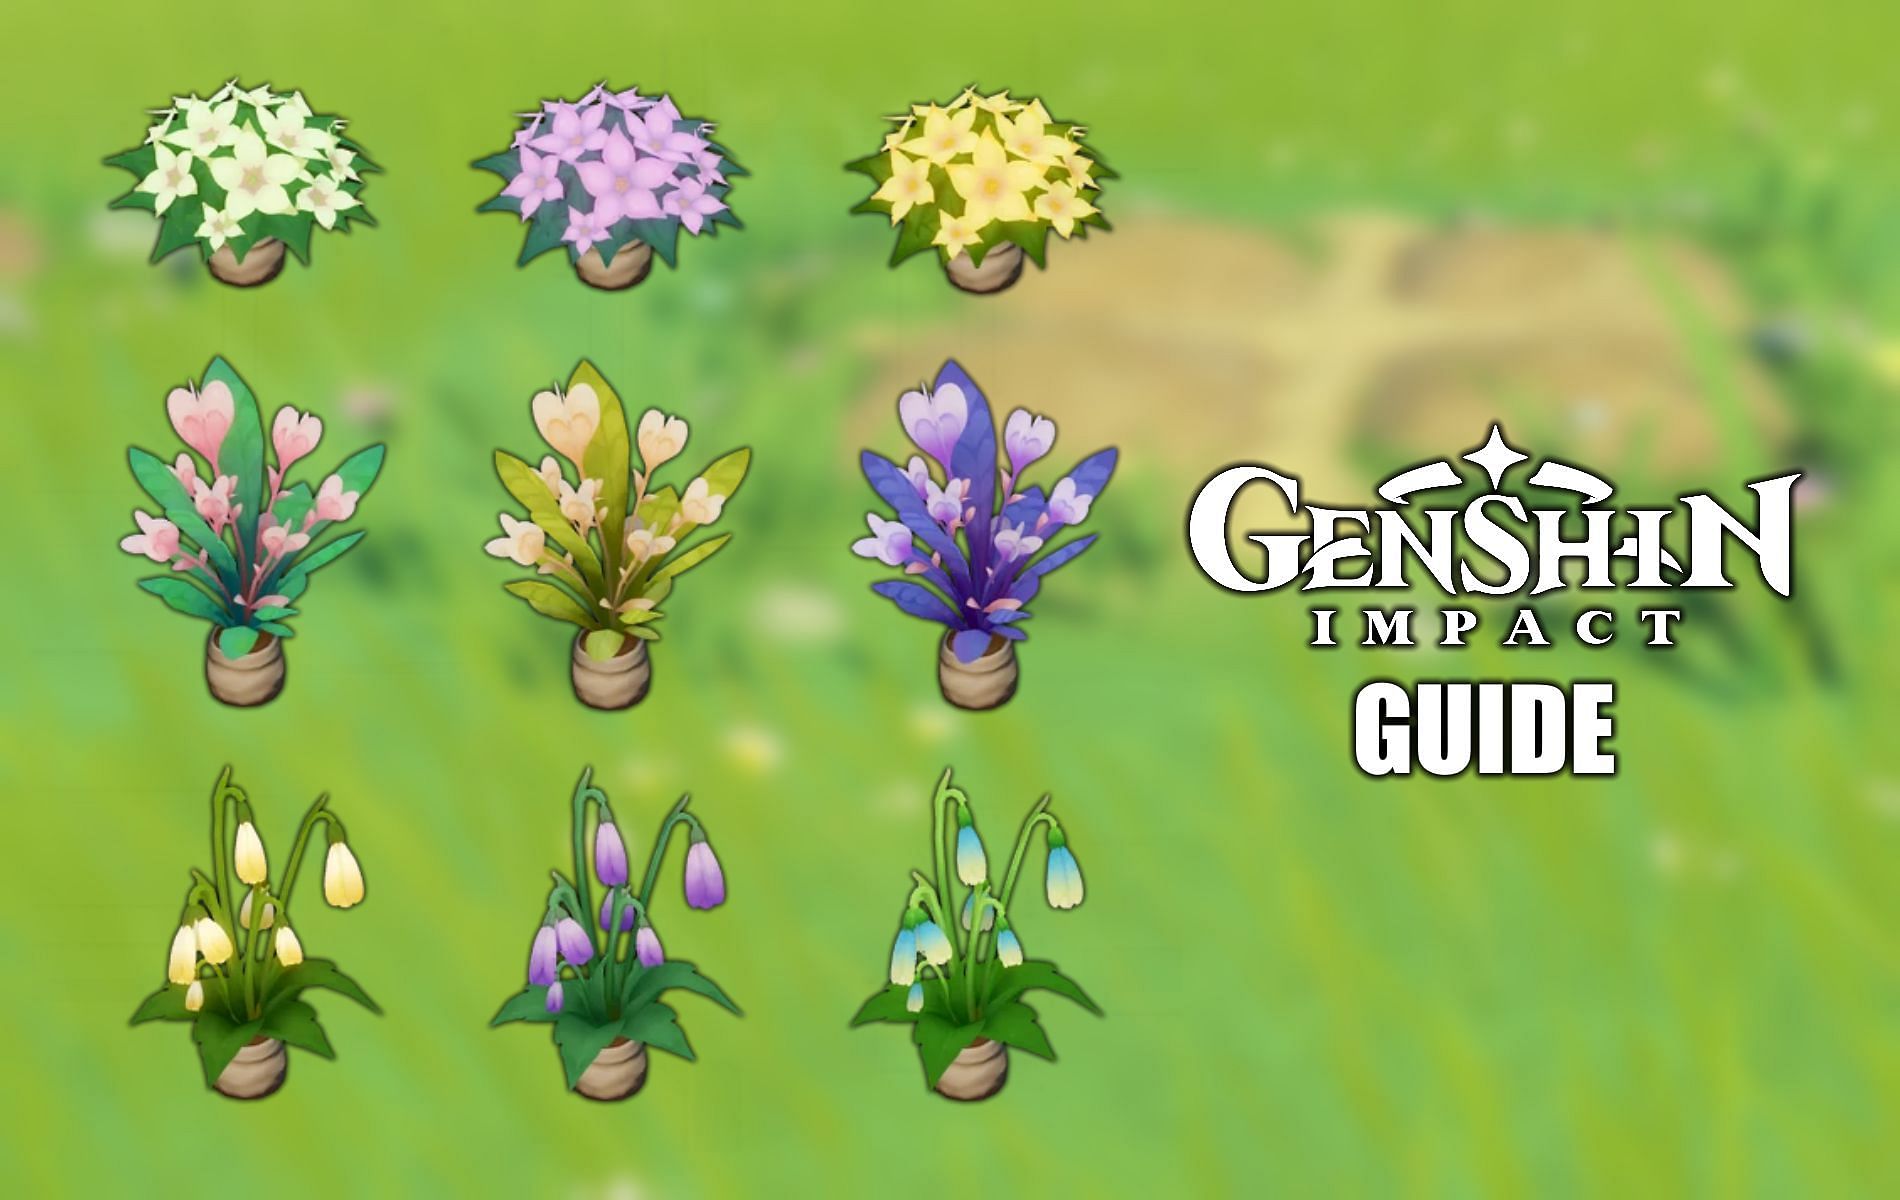 Terraria guide - Planting seeds and growing plants 